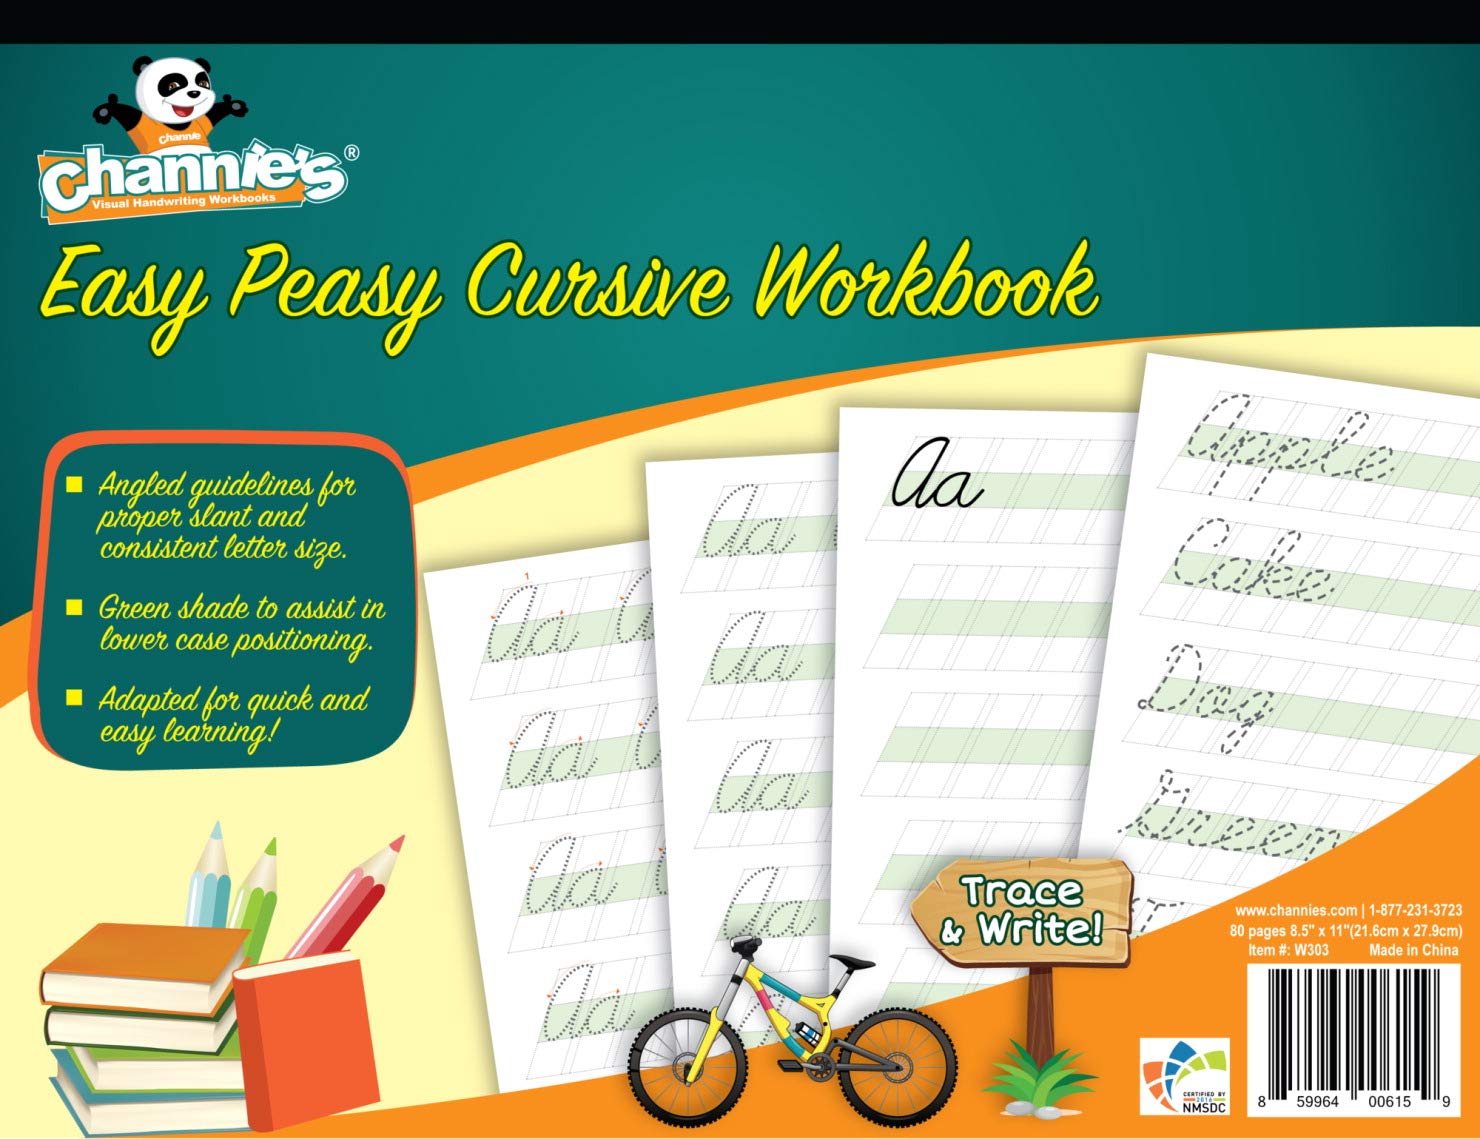 Book Cover Channie’s Easy Peasy Cursive Handwriting Workbook for Kids, Tracing & Cursive Writing Practice Book, 80 Pages Front & Back, 40 Sheets, Grades 1st – 3rd, Size 8.5” x 11”